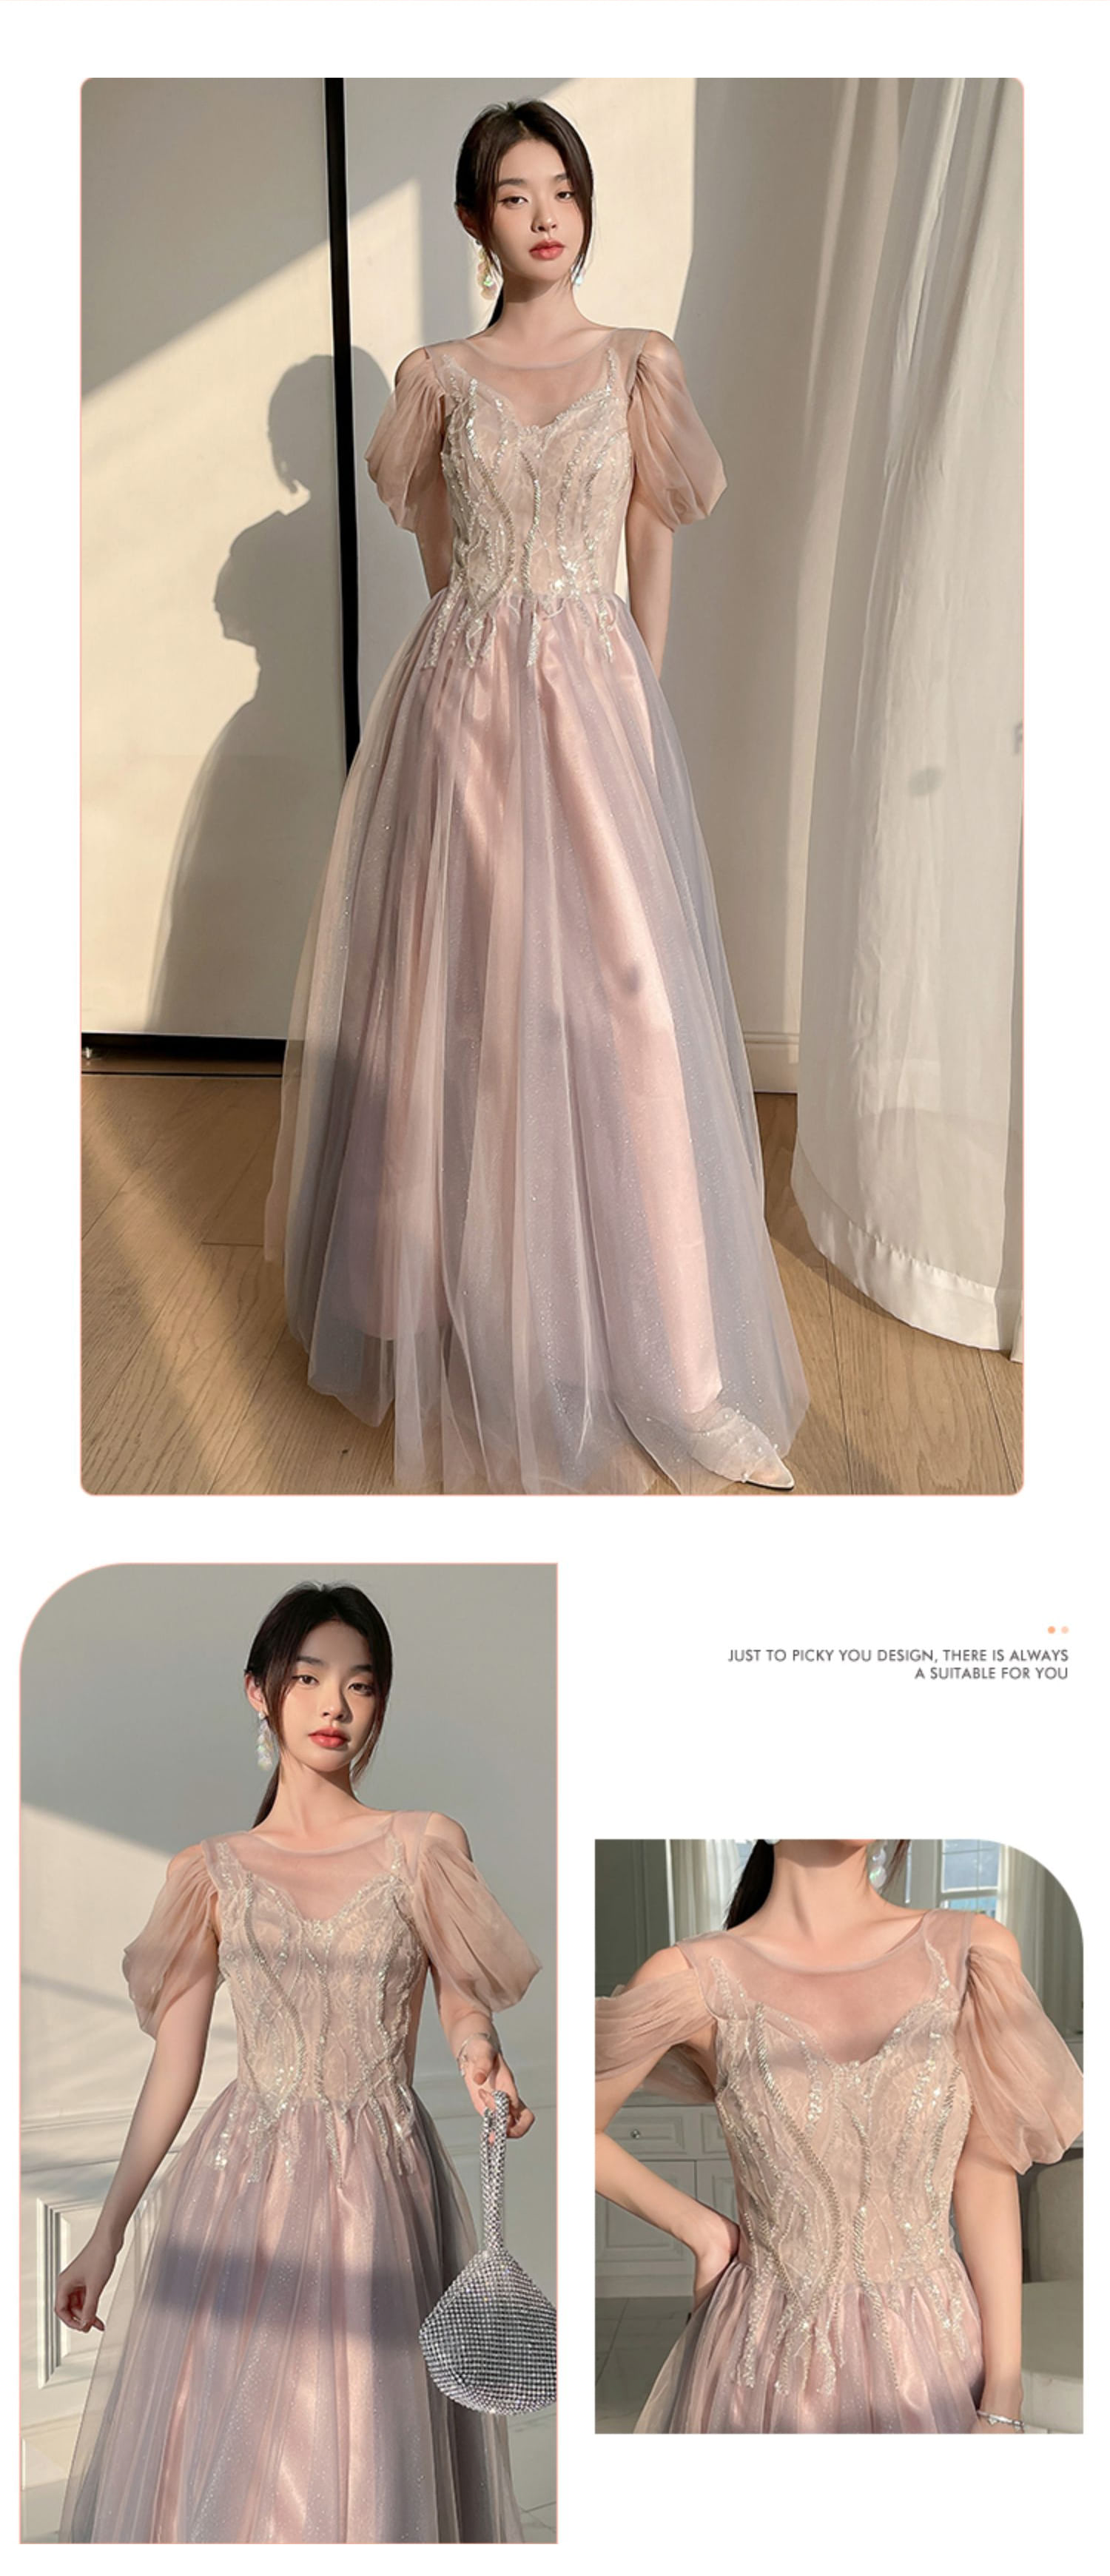 Elegant-Pale-Pink-Maxi-Bridesmaid-Dress-Long-Party-Ball-Gown24